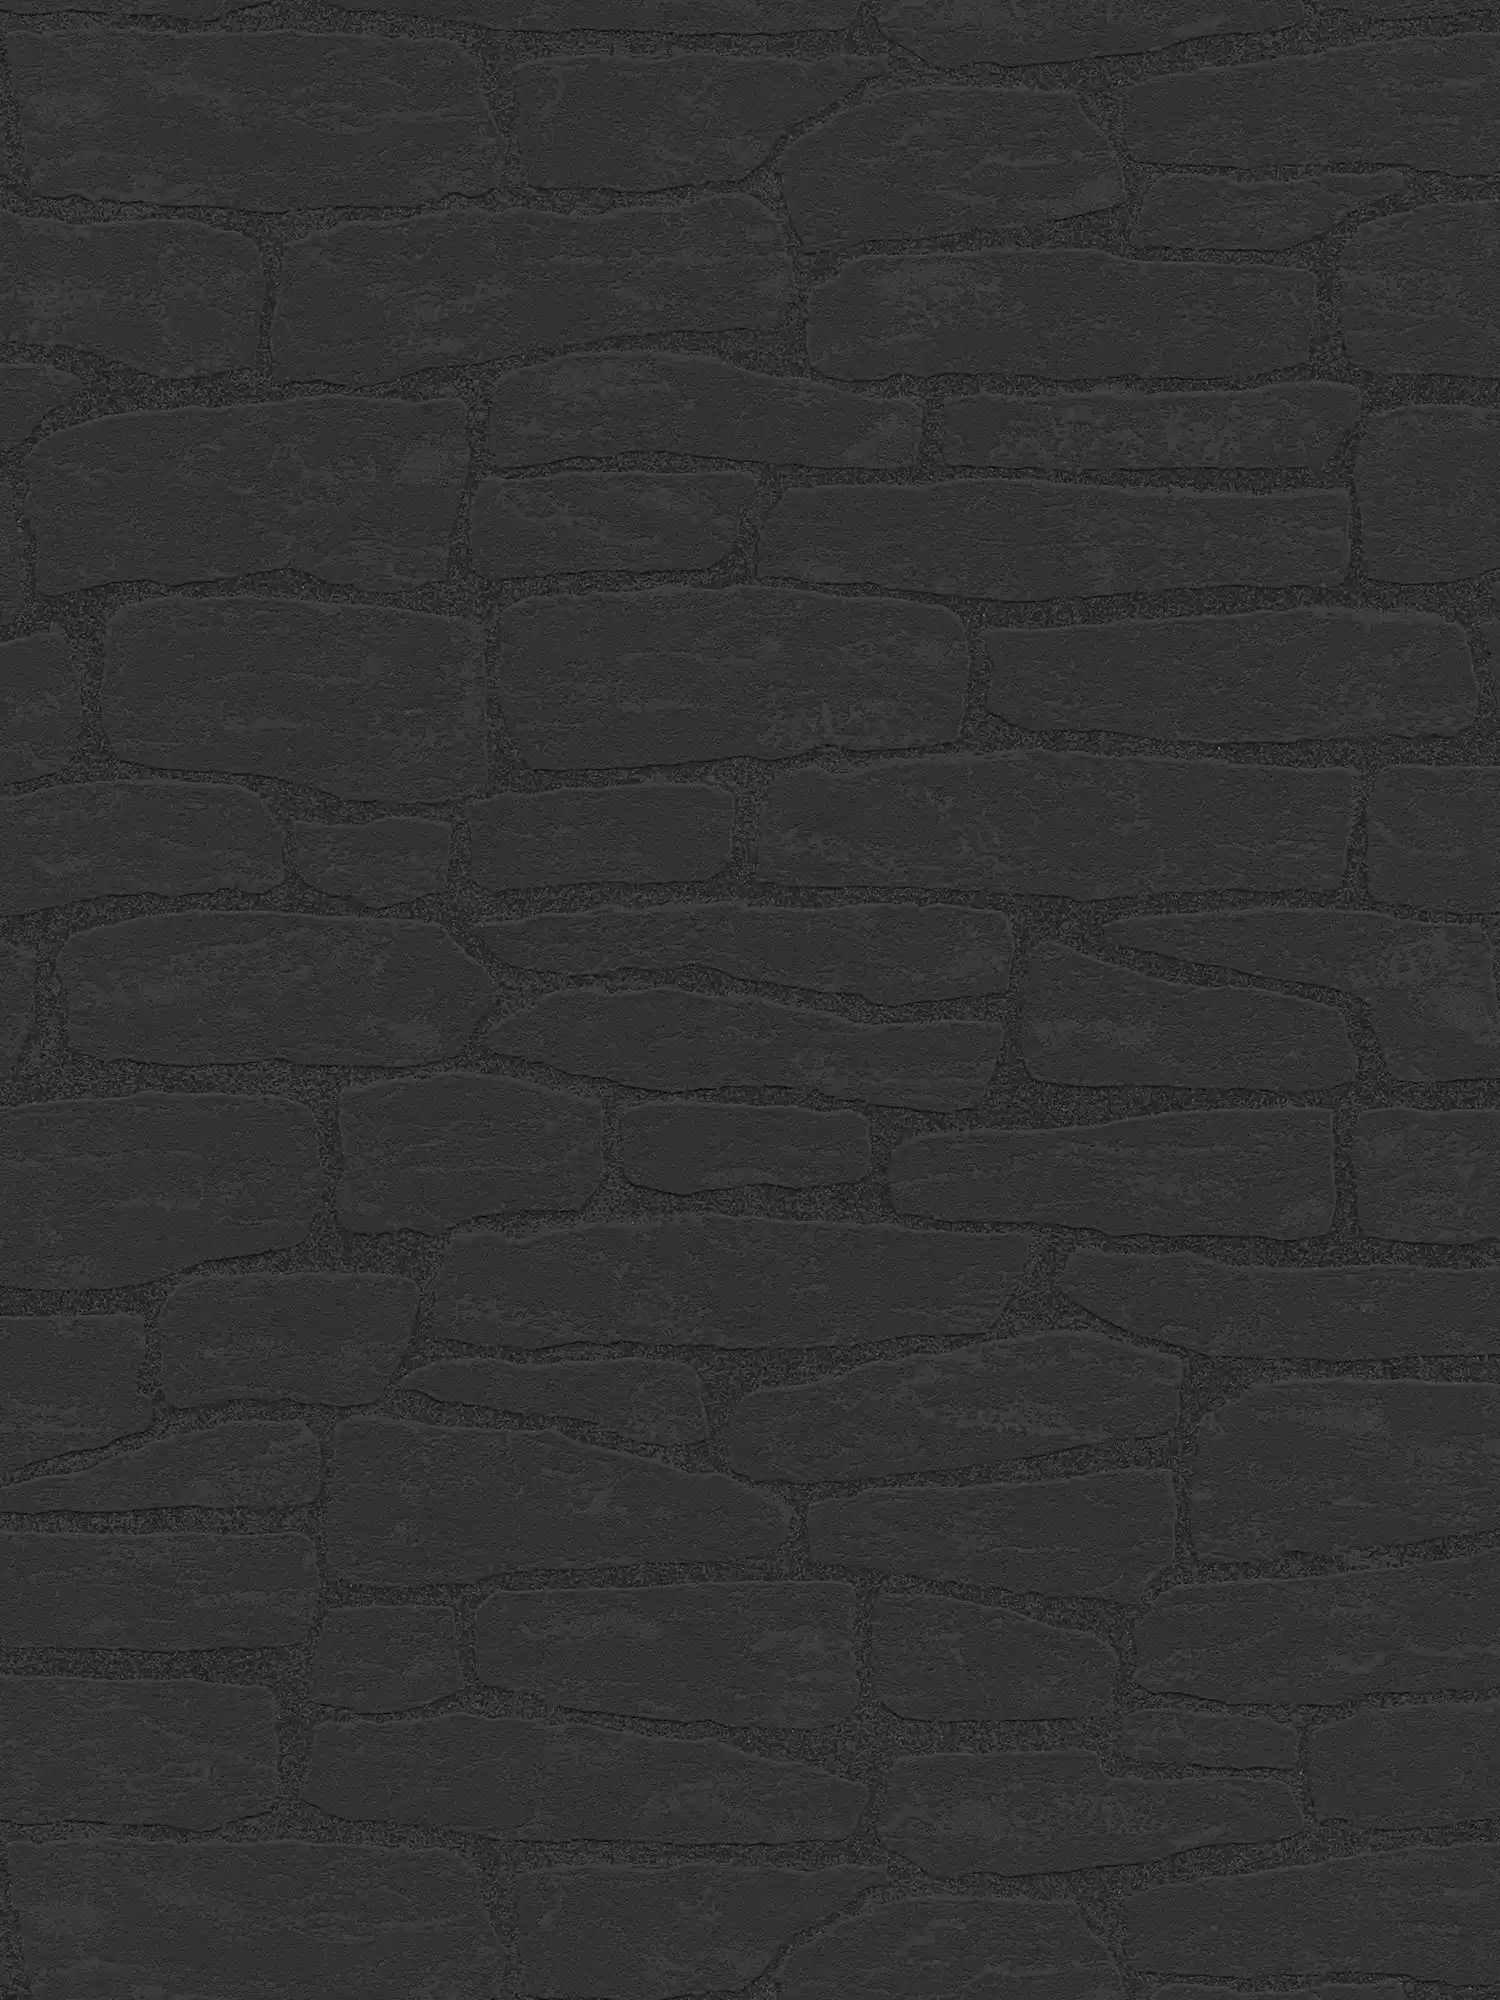 Stone wallpaper with textured pattern and 3D effect - black
